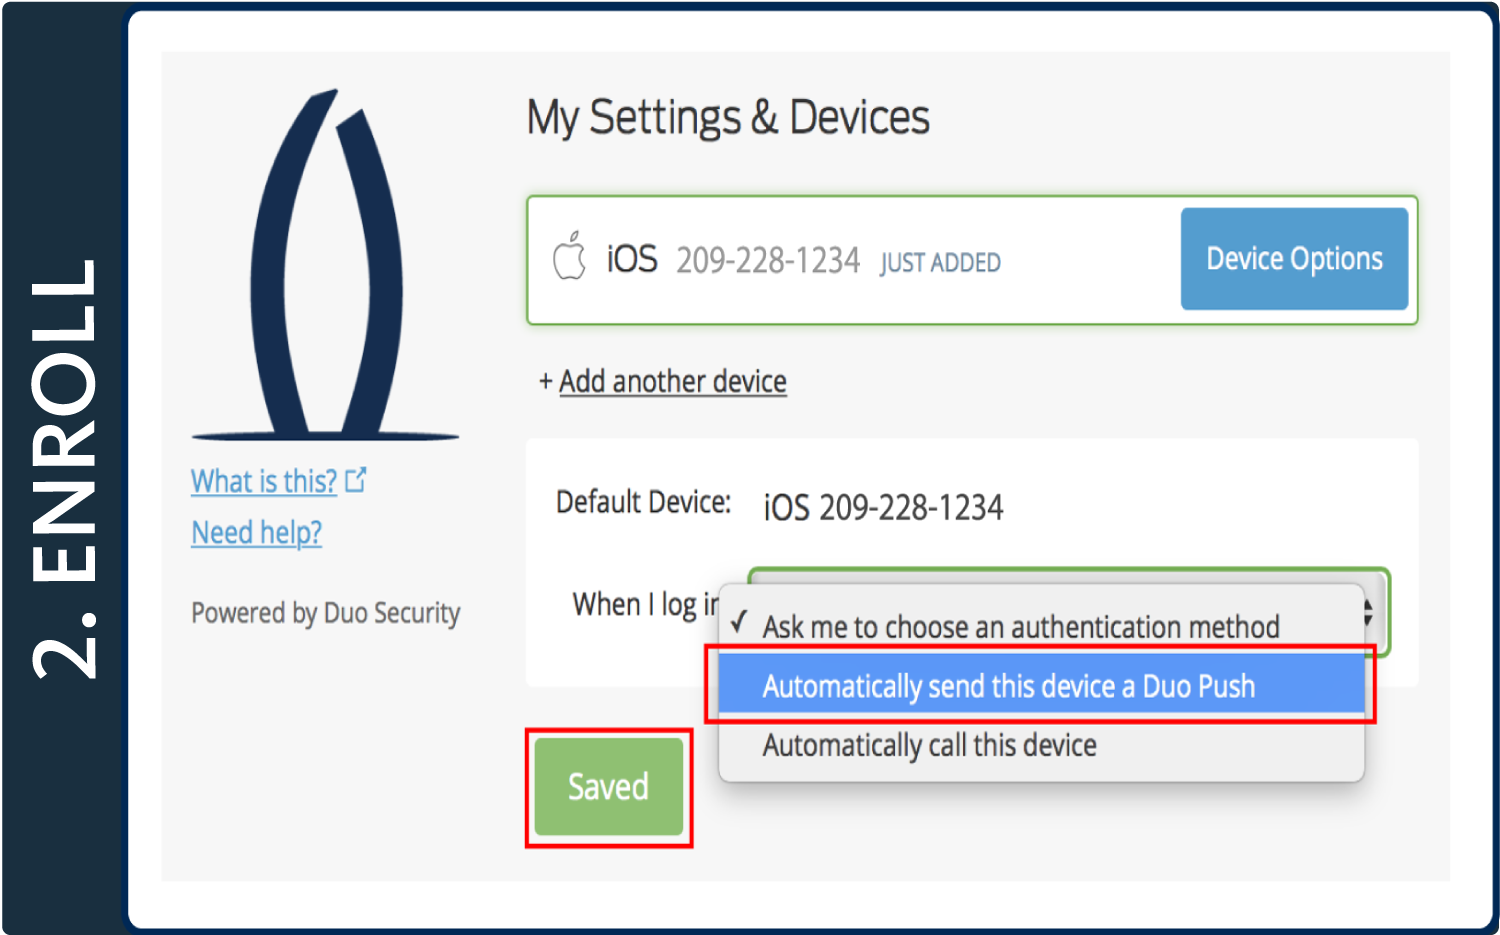 Select the method by which you will typically authenticate — either via Push message or phone call — and click Save.